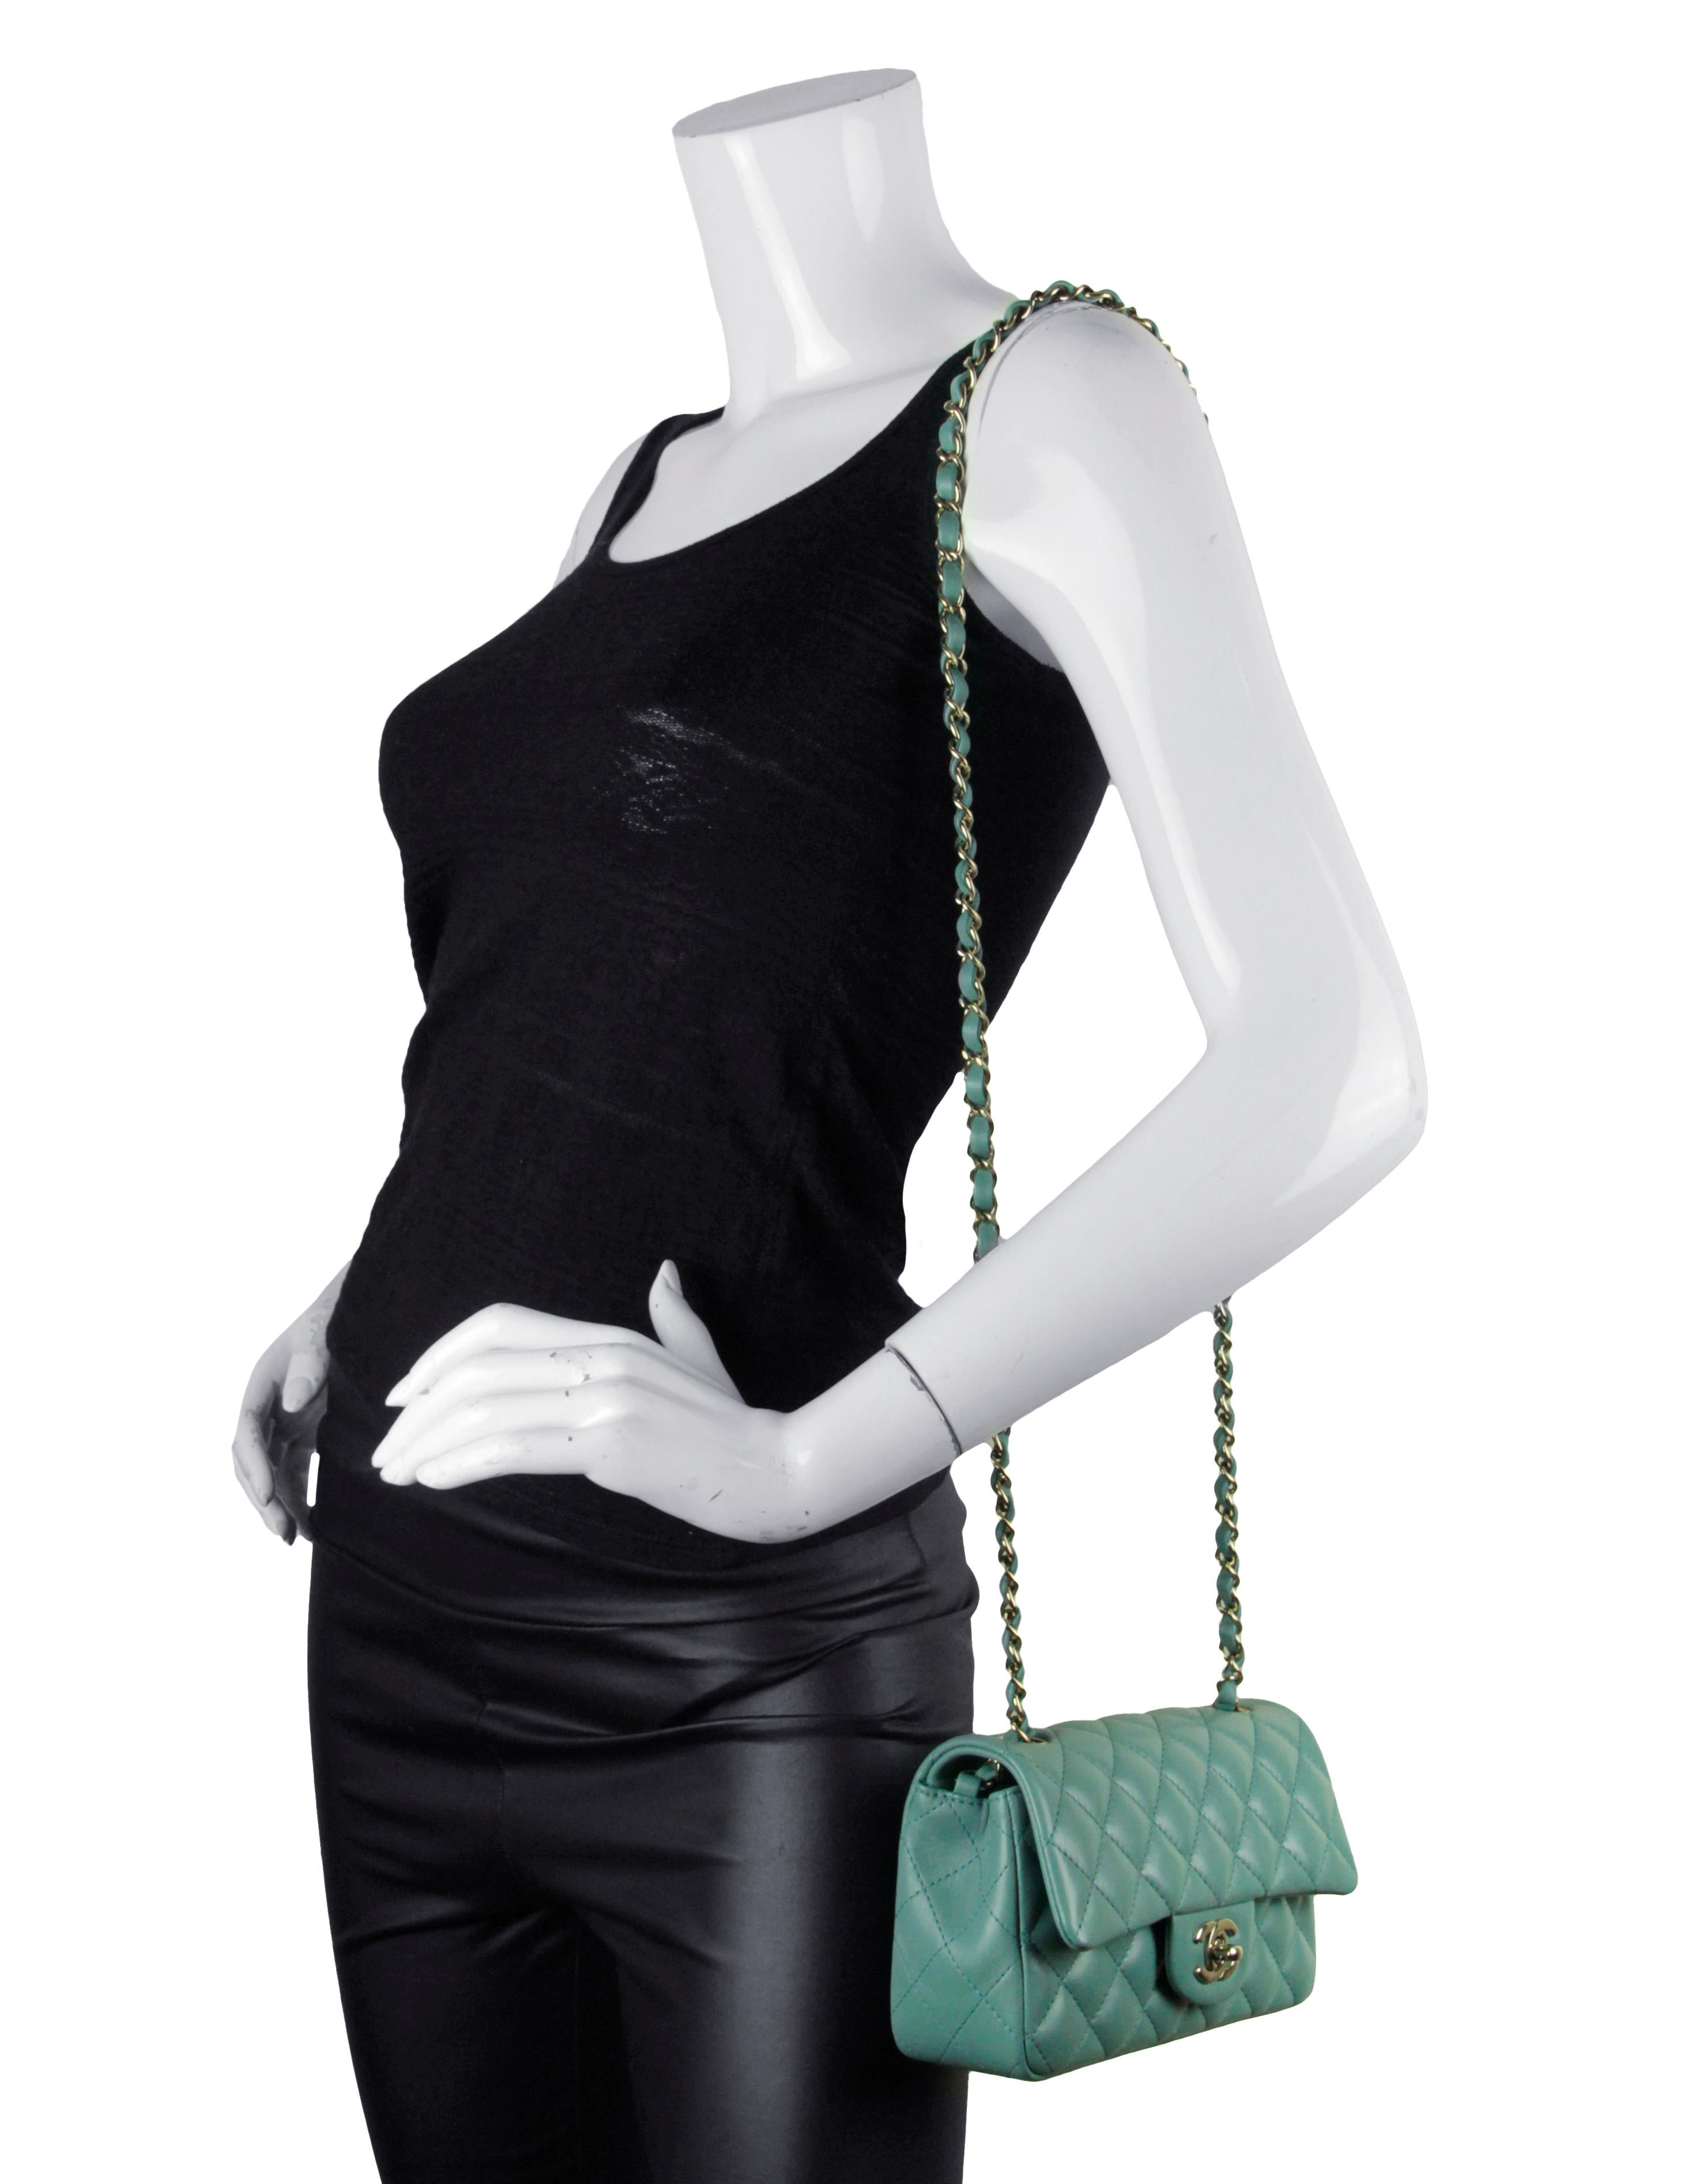 Chanel Seafoam Green Lambskin Quilted Rectangular Mini Flap Bag

Made In: Italy
Color: Seafoam green
Hardware: Brushed goldtone
Materials: Lambskin leather
Lining: Smooth leather
Closure/Opening: Flap top with CC twistlock
Exterior Pockets:One back